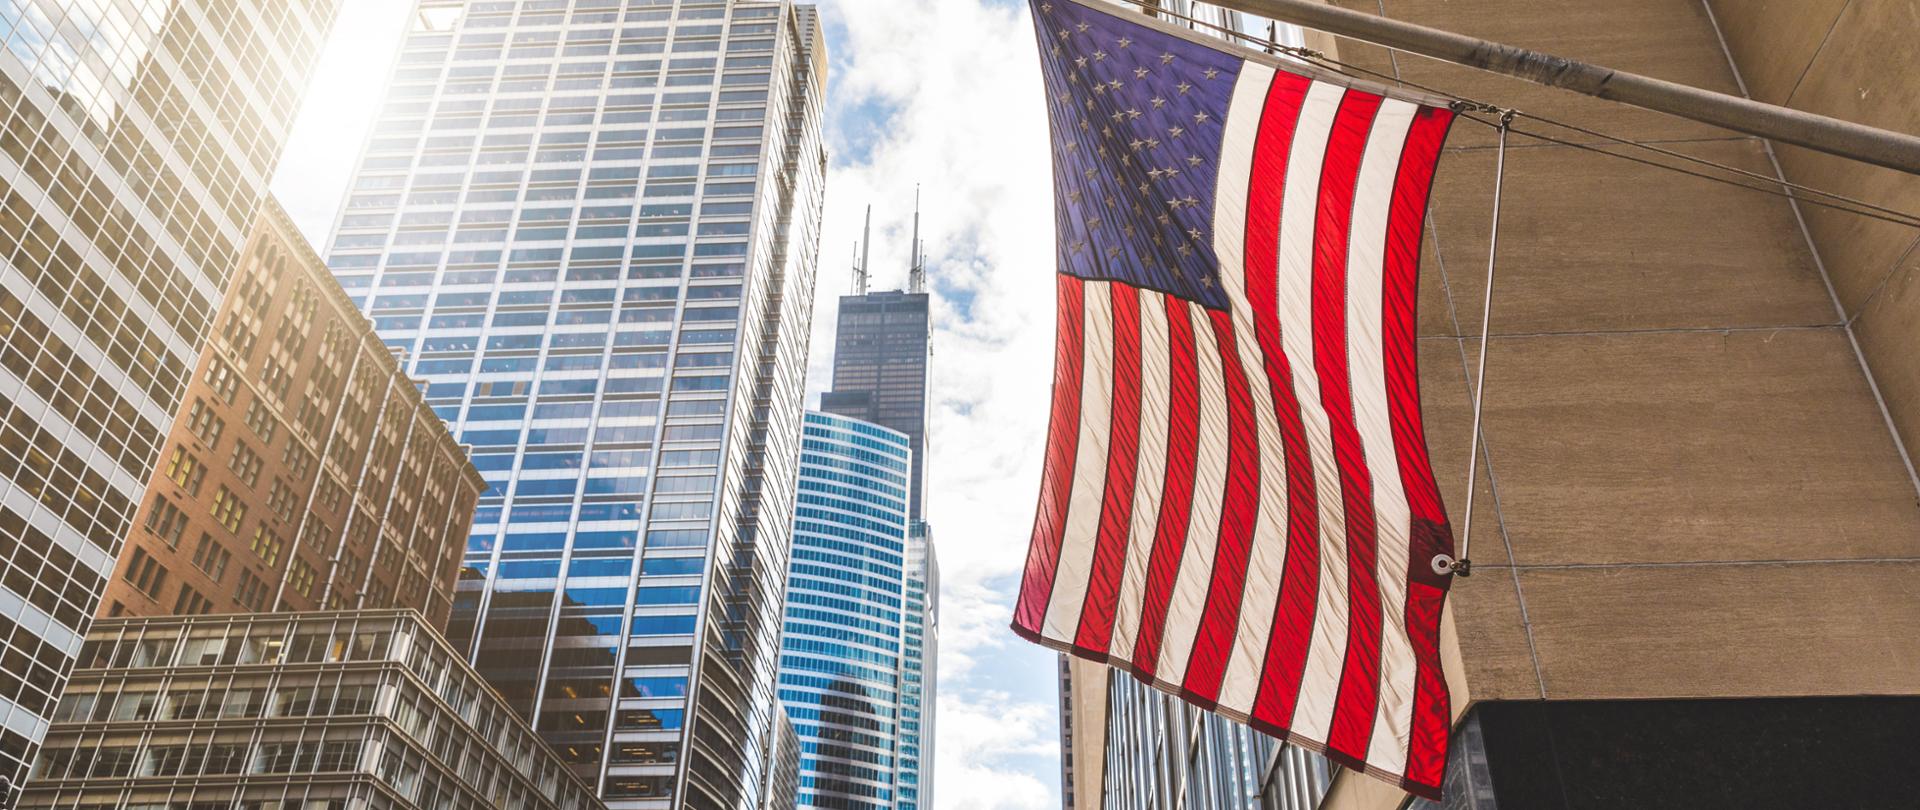 USA flag in Chicago with with skyscrapers on background. American flag waving in the city on a sunny day. Clouds reflections on buildings facade